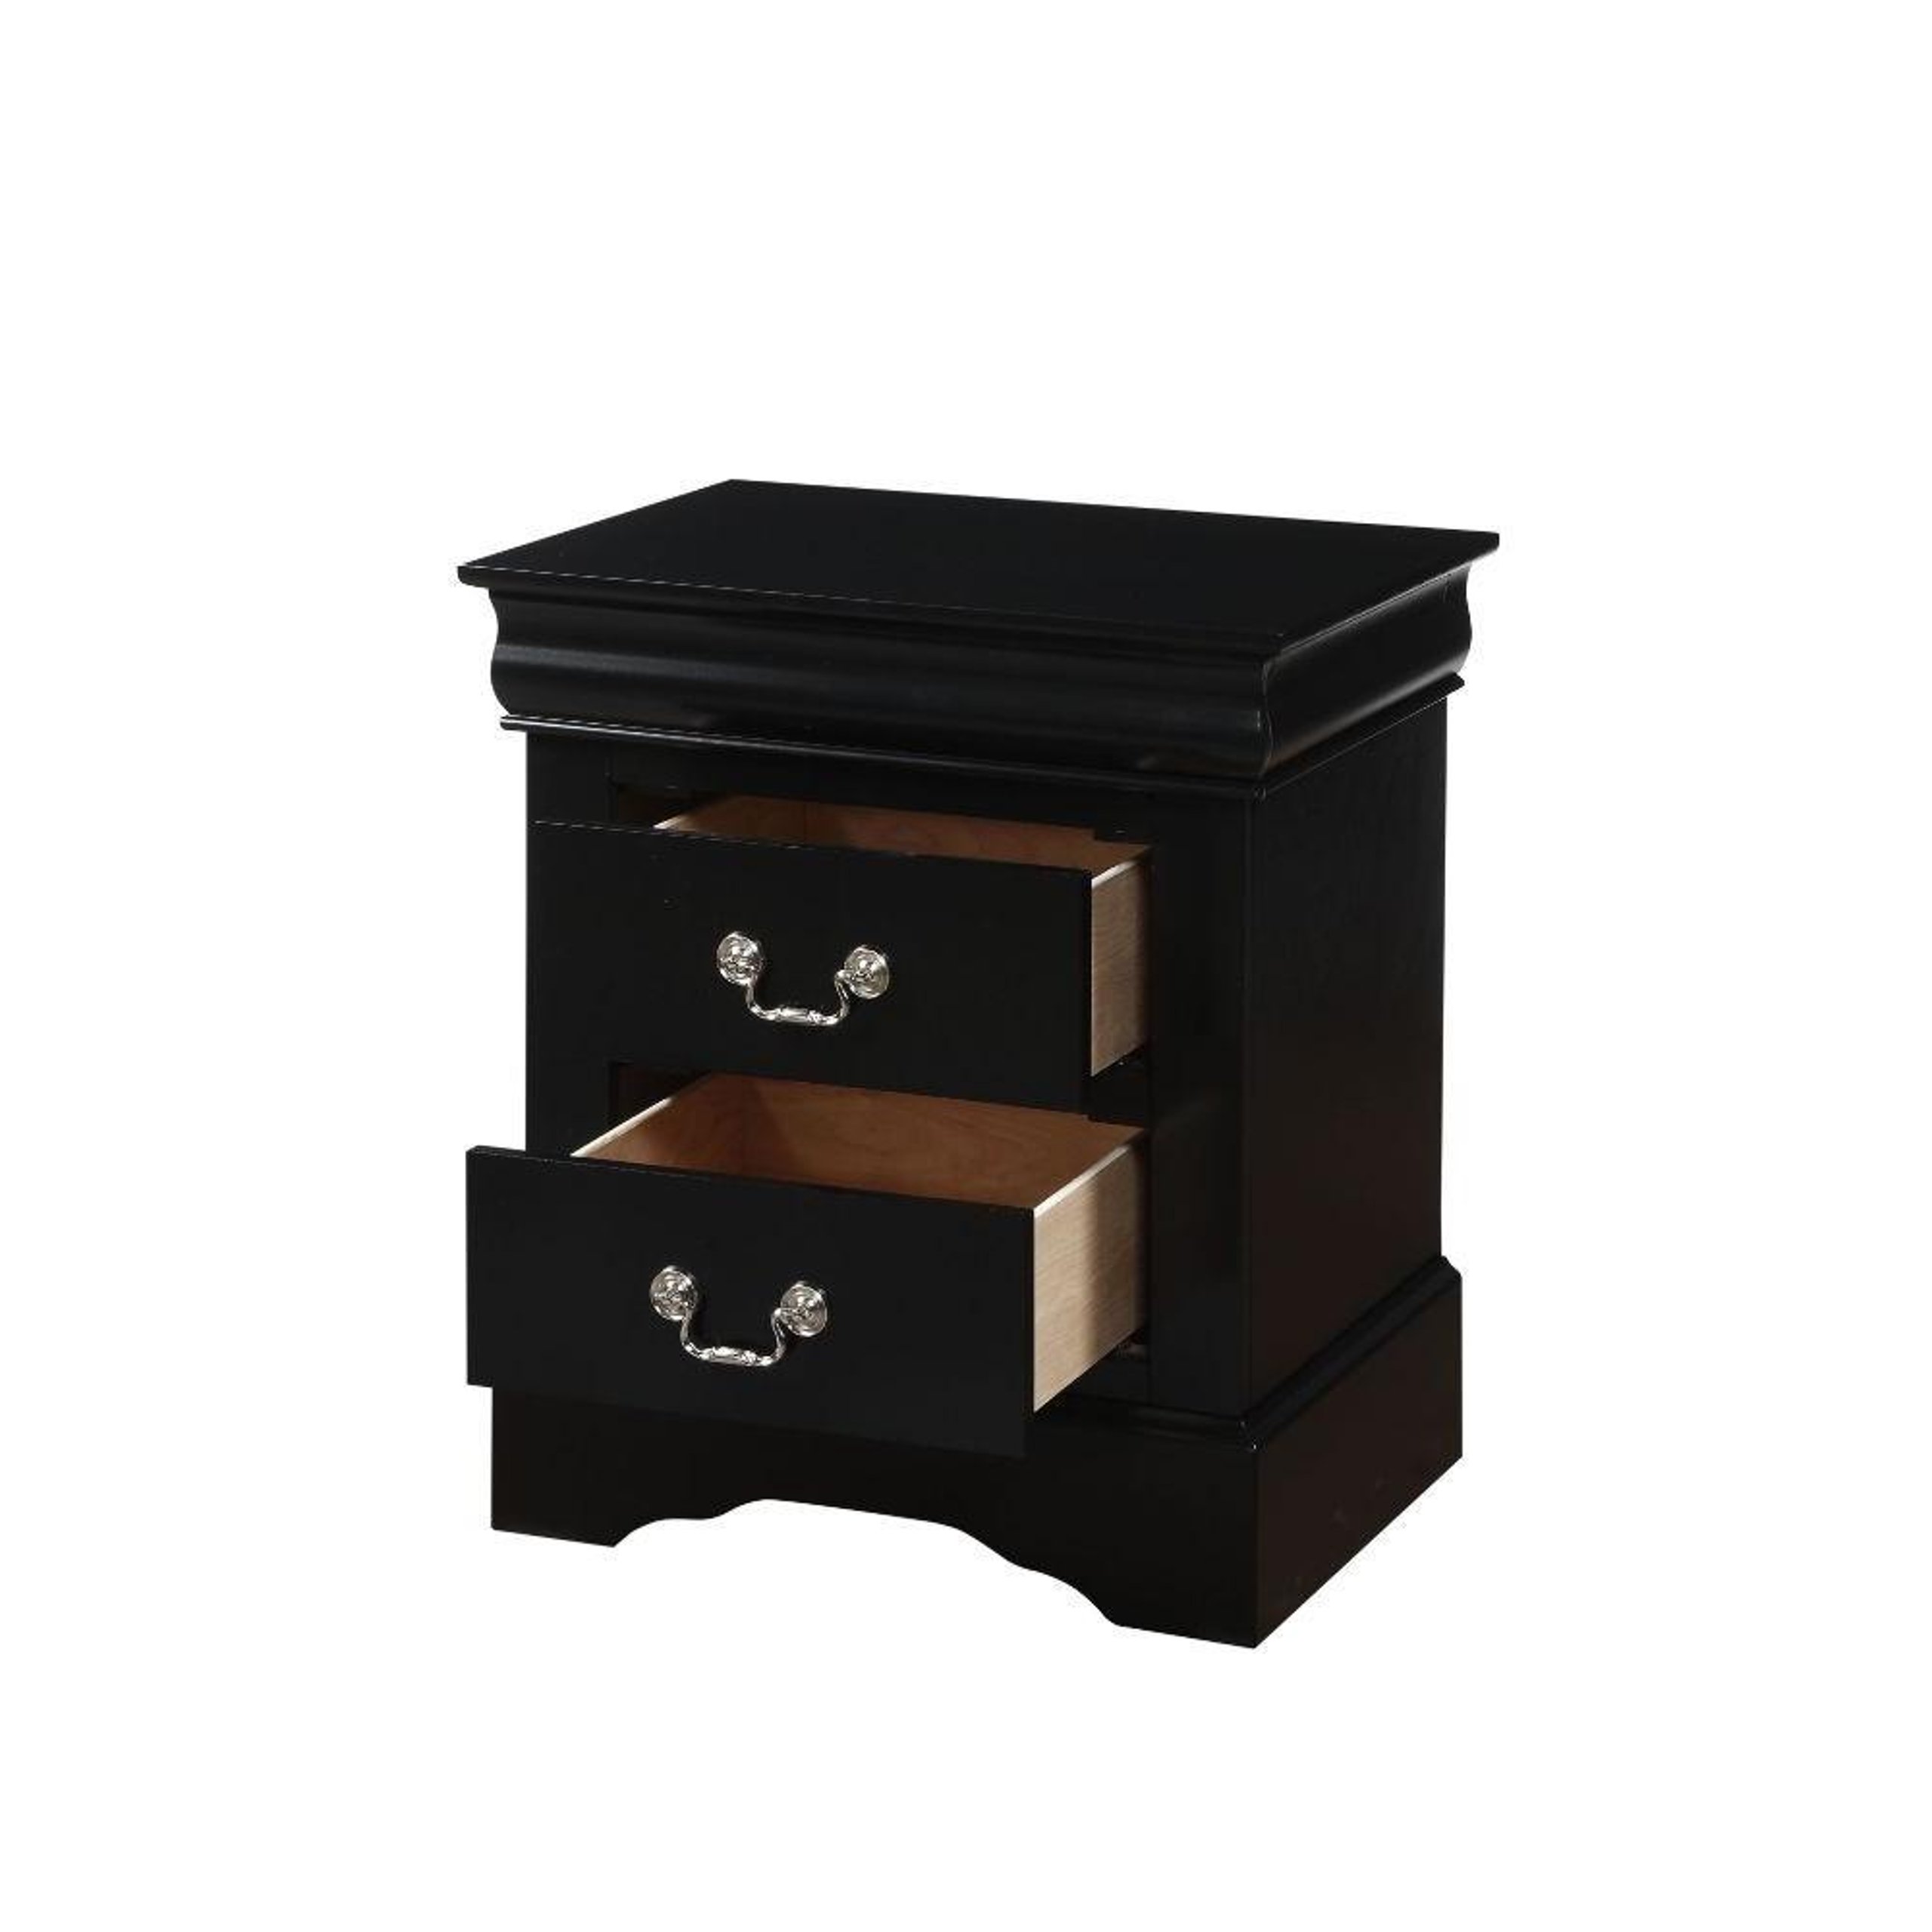 Contemporary Black Queen 3pcs Bedroom Set by Acme Louis Philippe III 19500Q-3pc  – buy online on NY Furniture Outlet